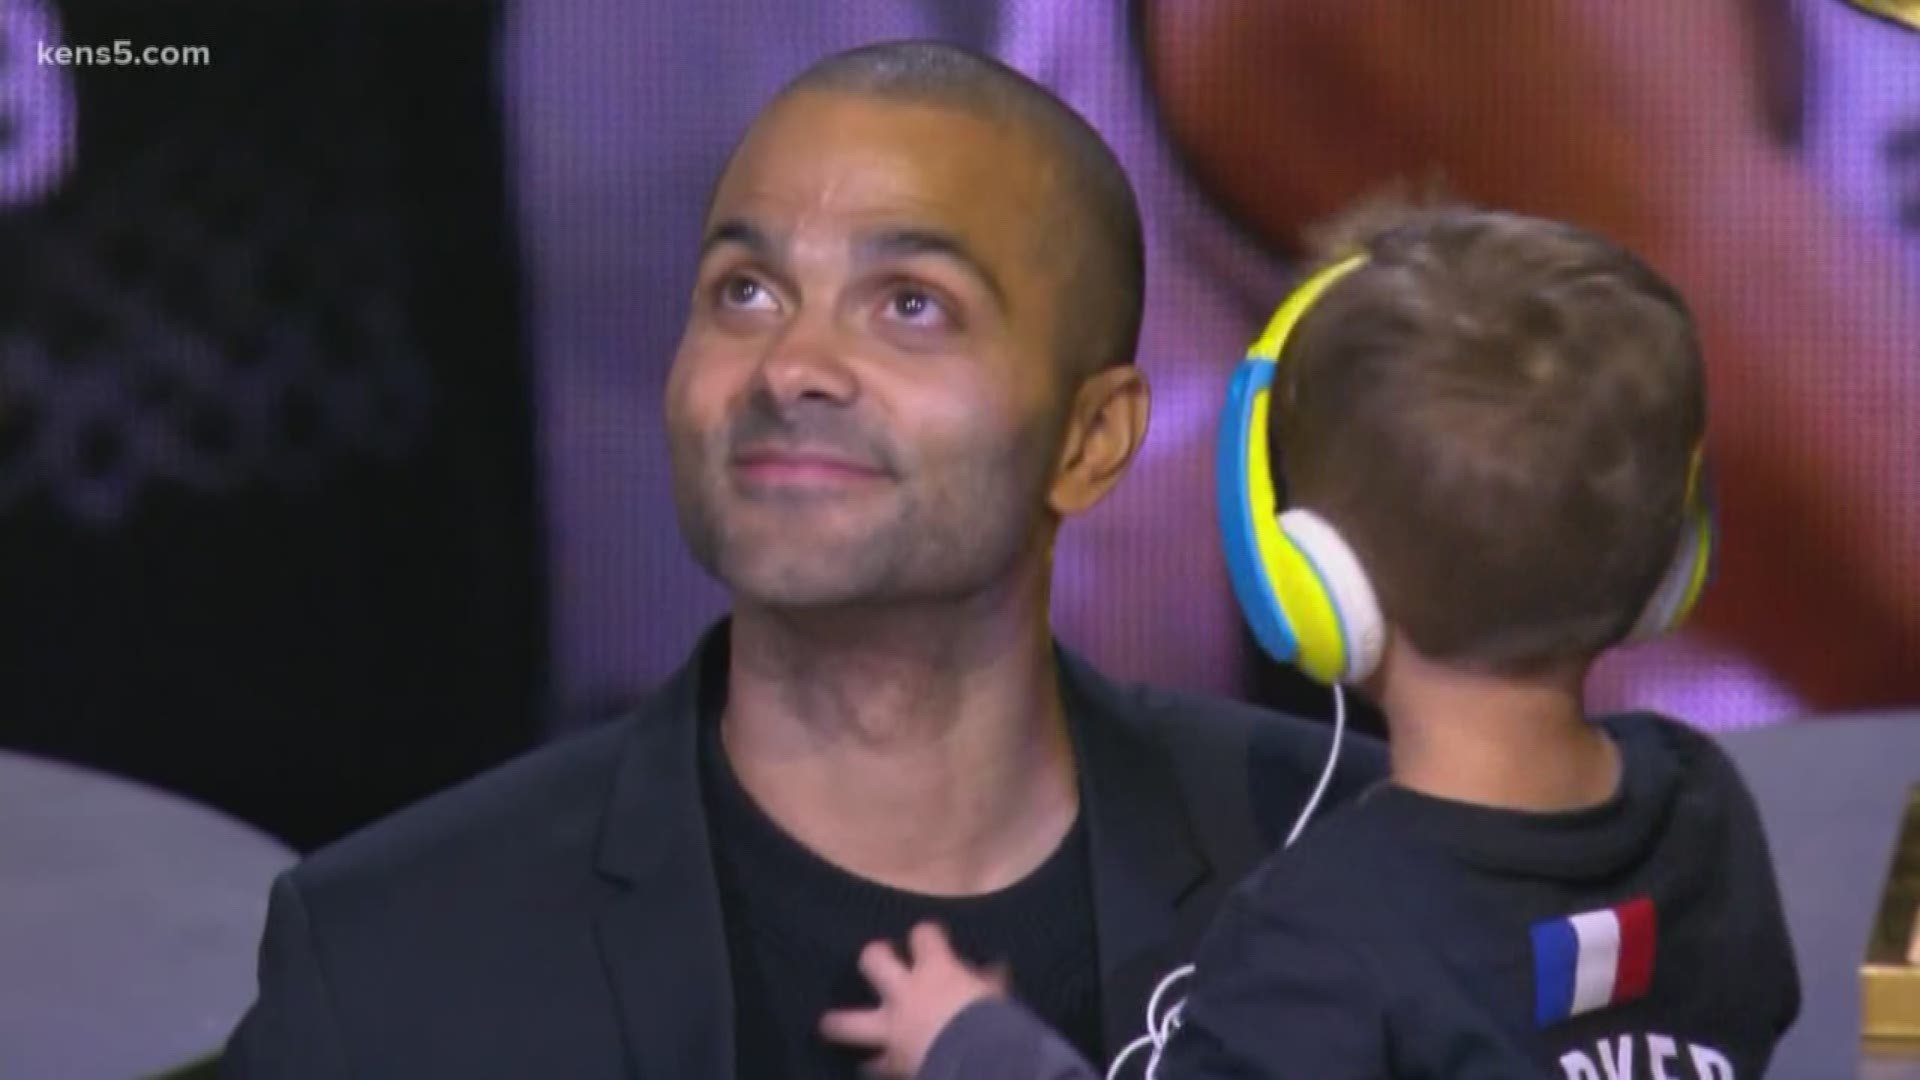 Tony Parker said he'd like to own an NBA team someday.